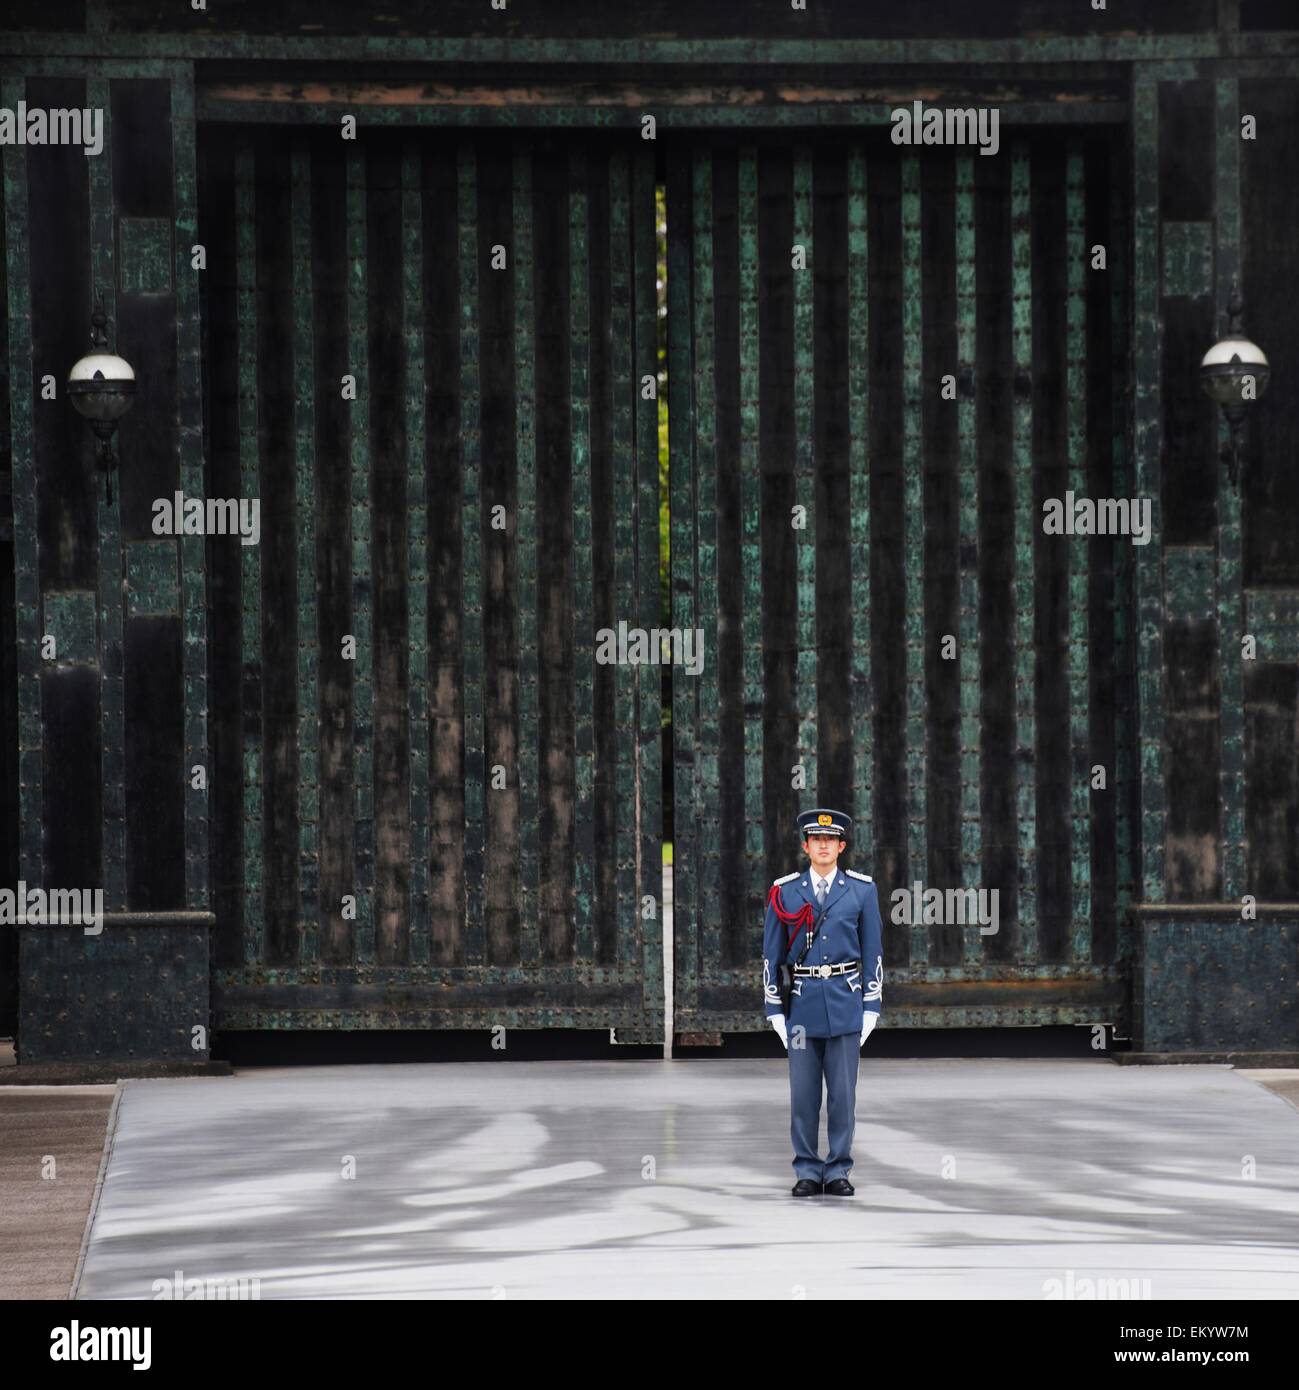 A Guard On Duty At The Imperial Palace; Tokyo, Japan Stock Photo